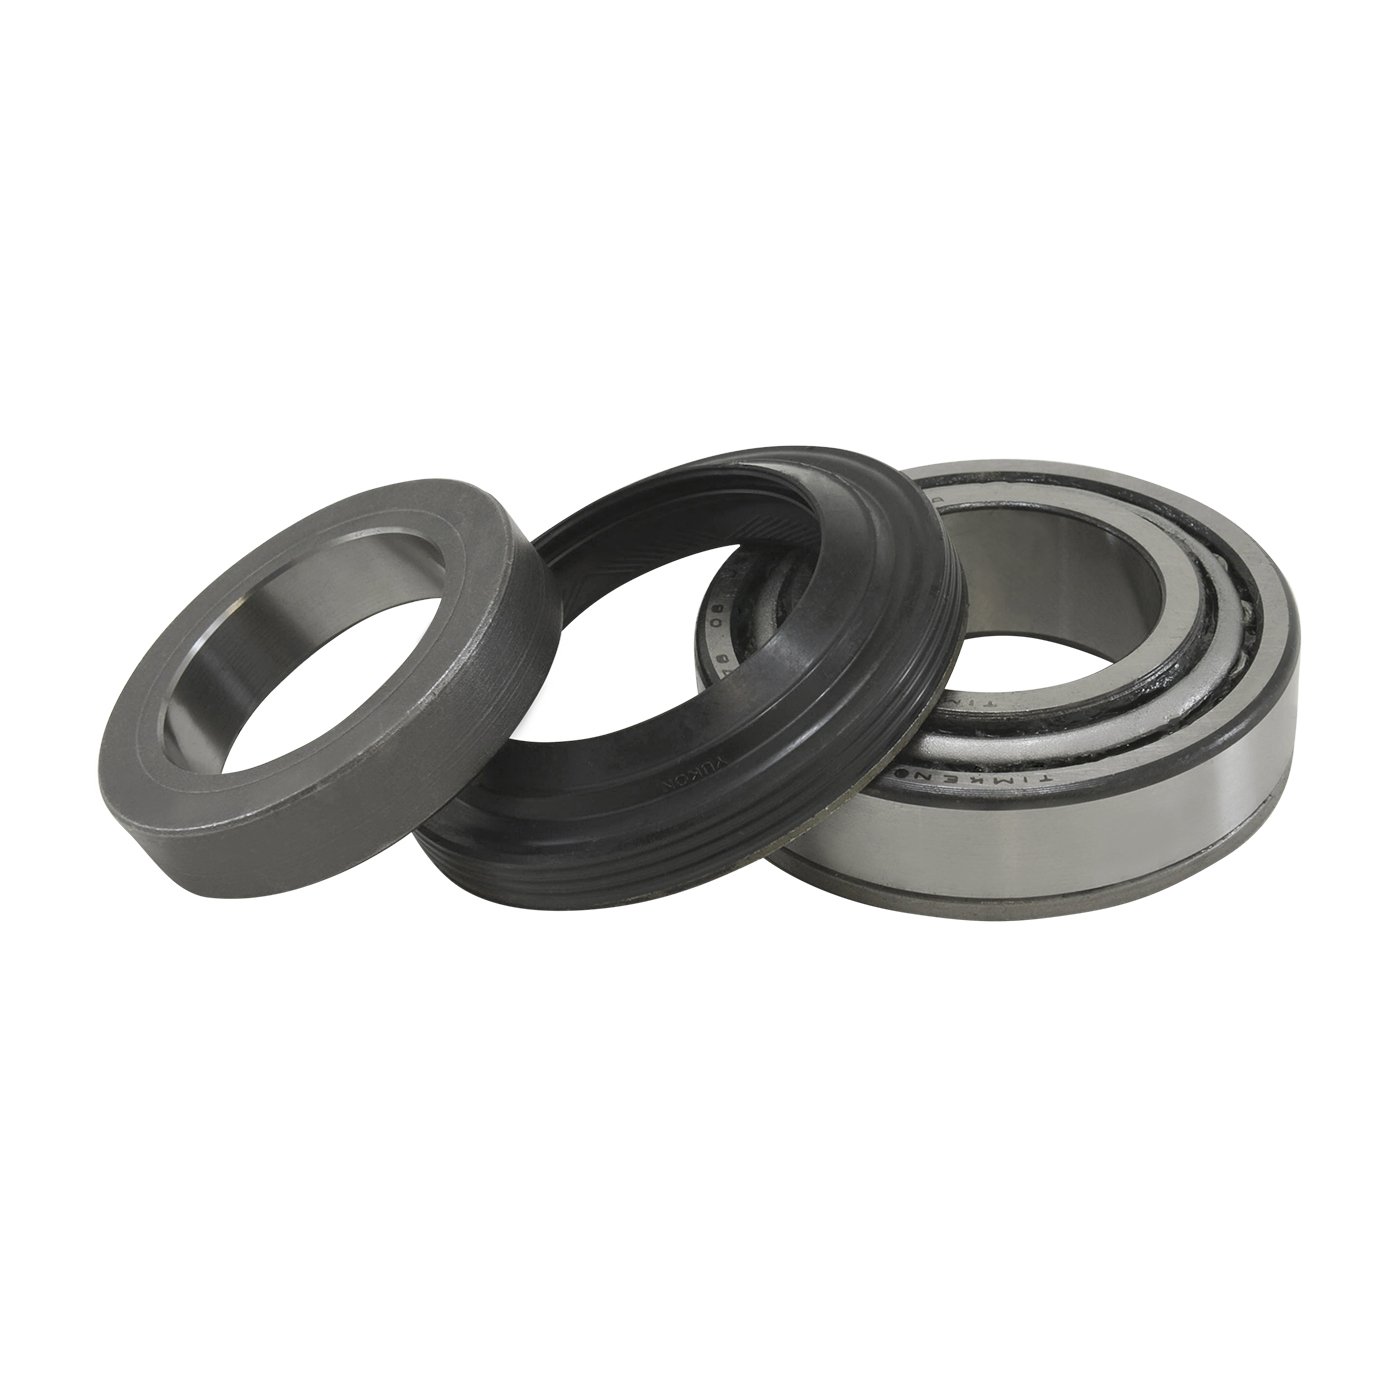 Rear Axle Bearing and Seal Kit 2007-14 Jeep Wrangler JK Includes: